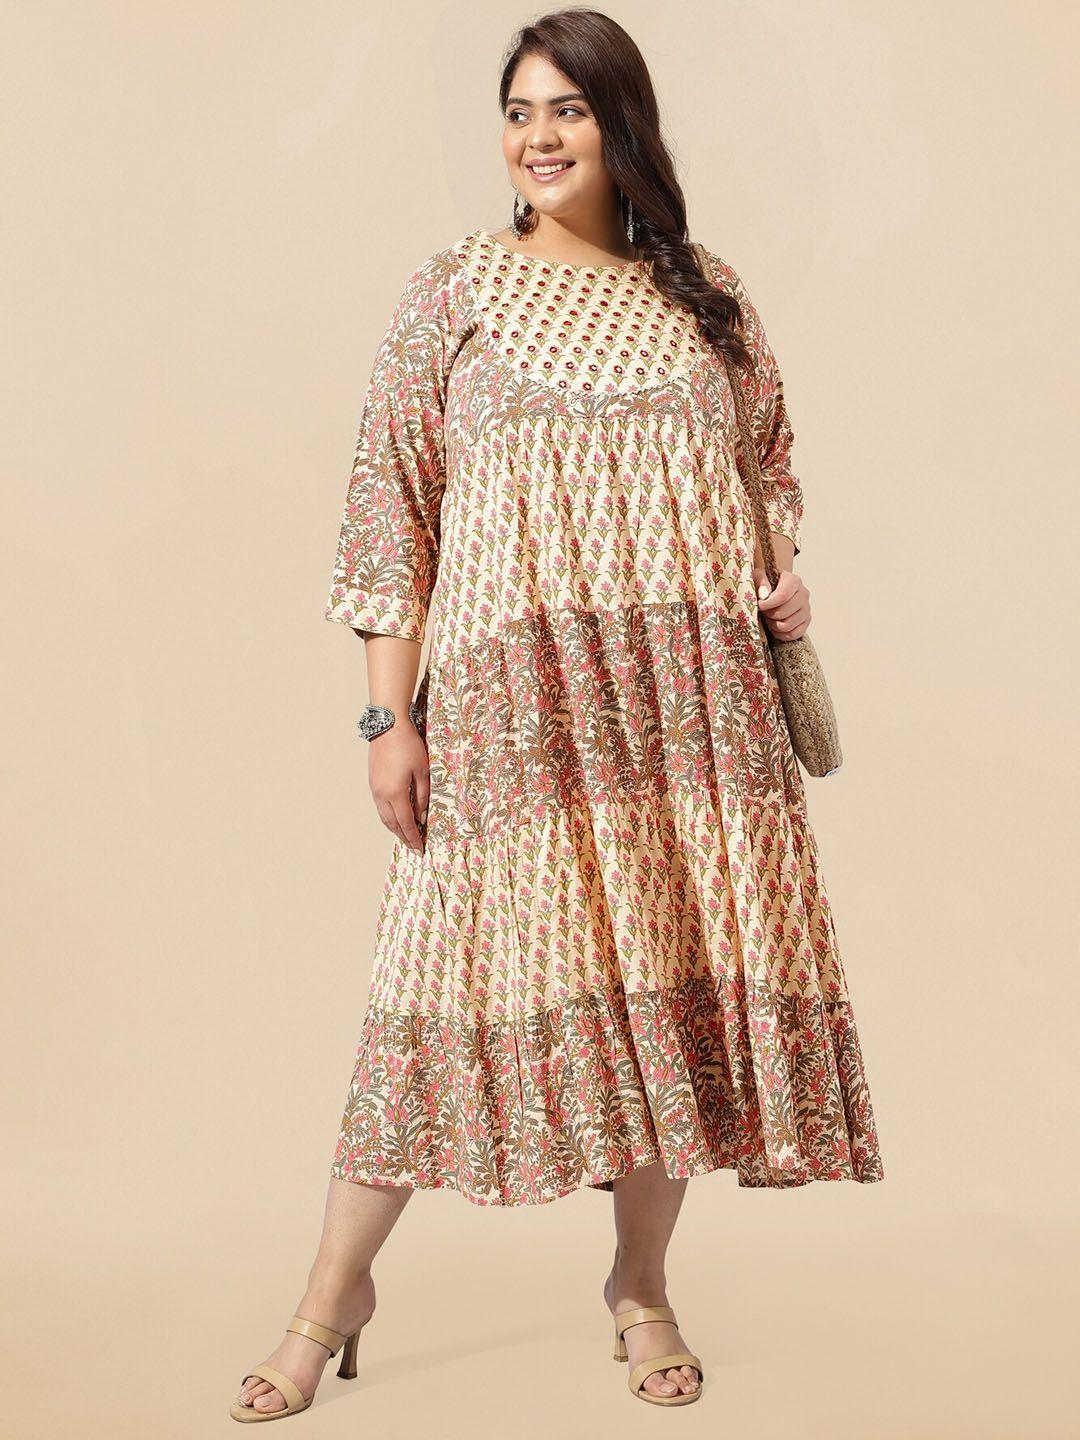 mirchi fashion cream plus size floral printed embroidered tiered empire ethnic dress